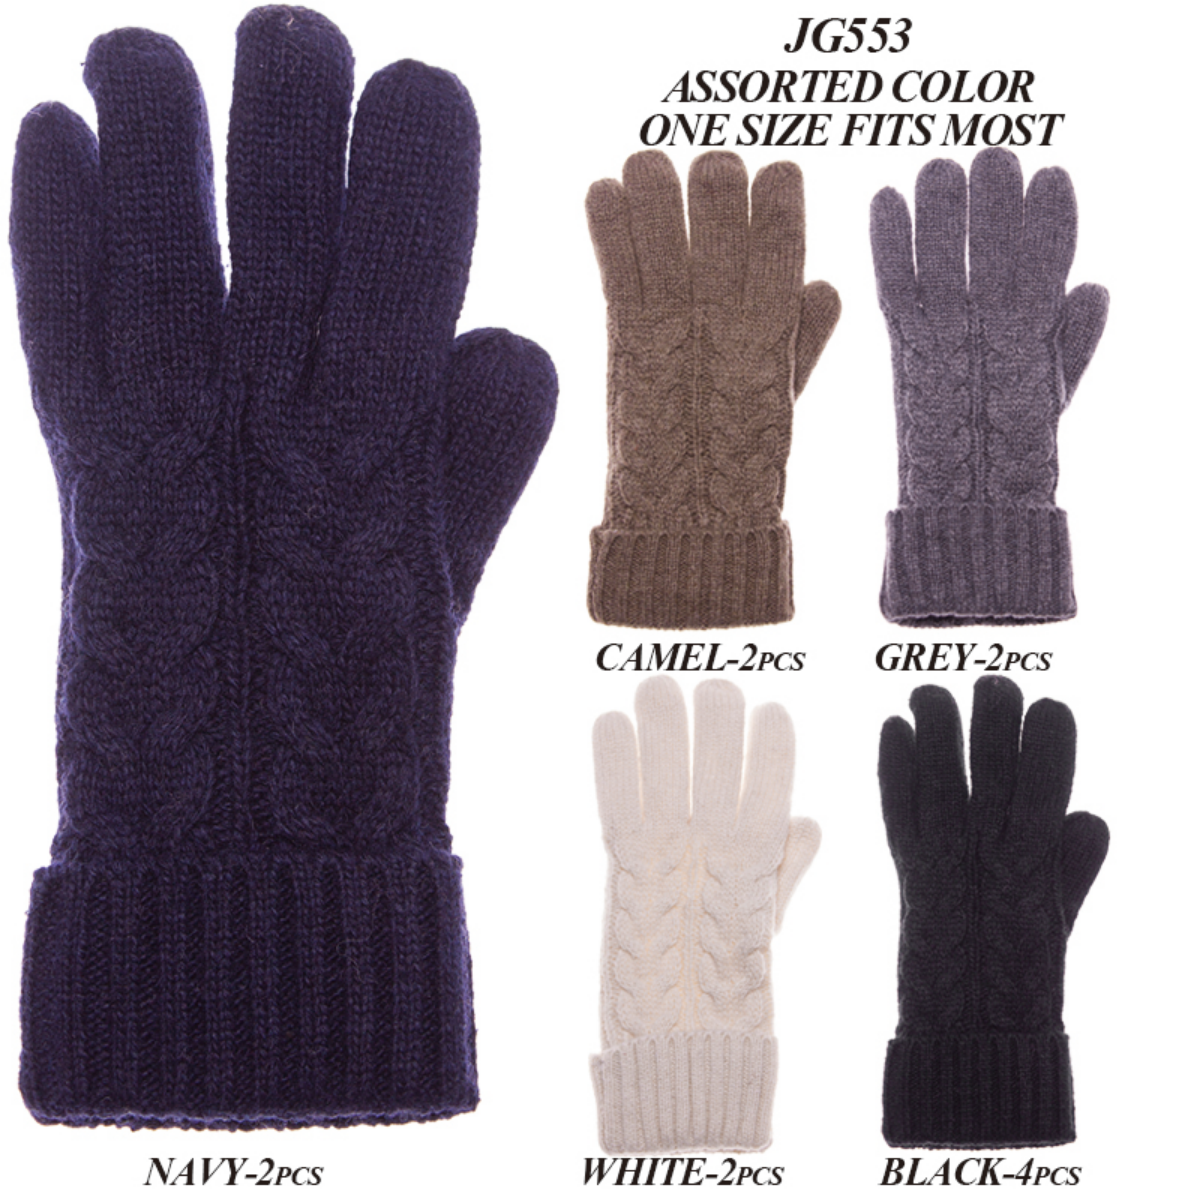 Solid Color Knitted Gloves W/ Cuffs & Double Lining - 12Pc Set